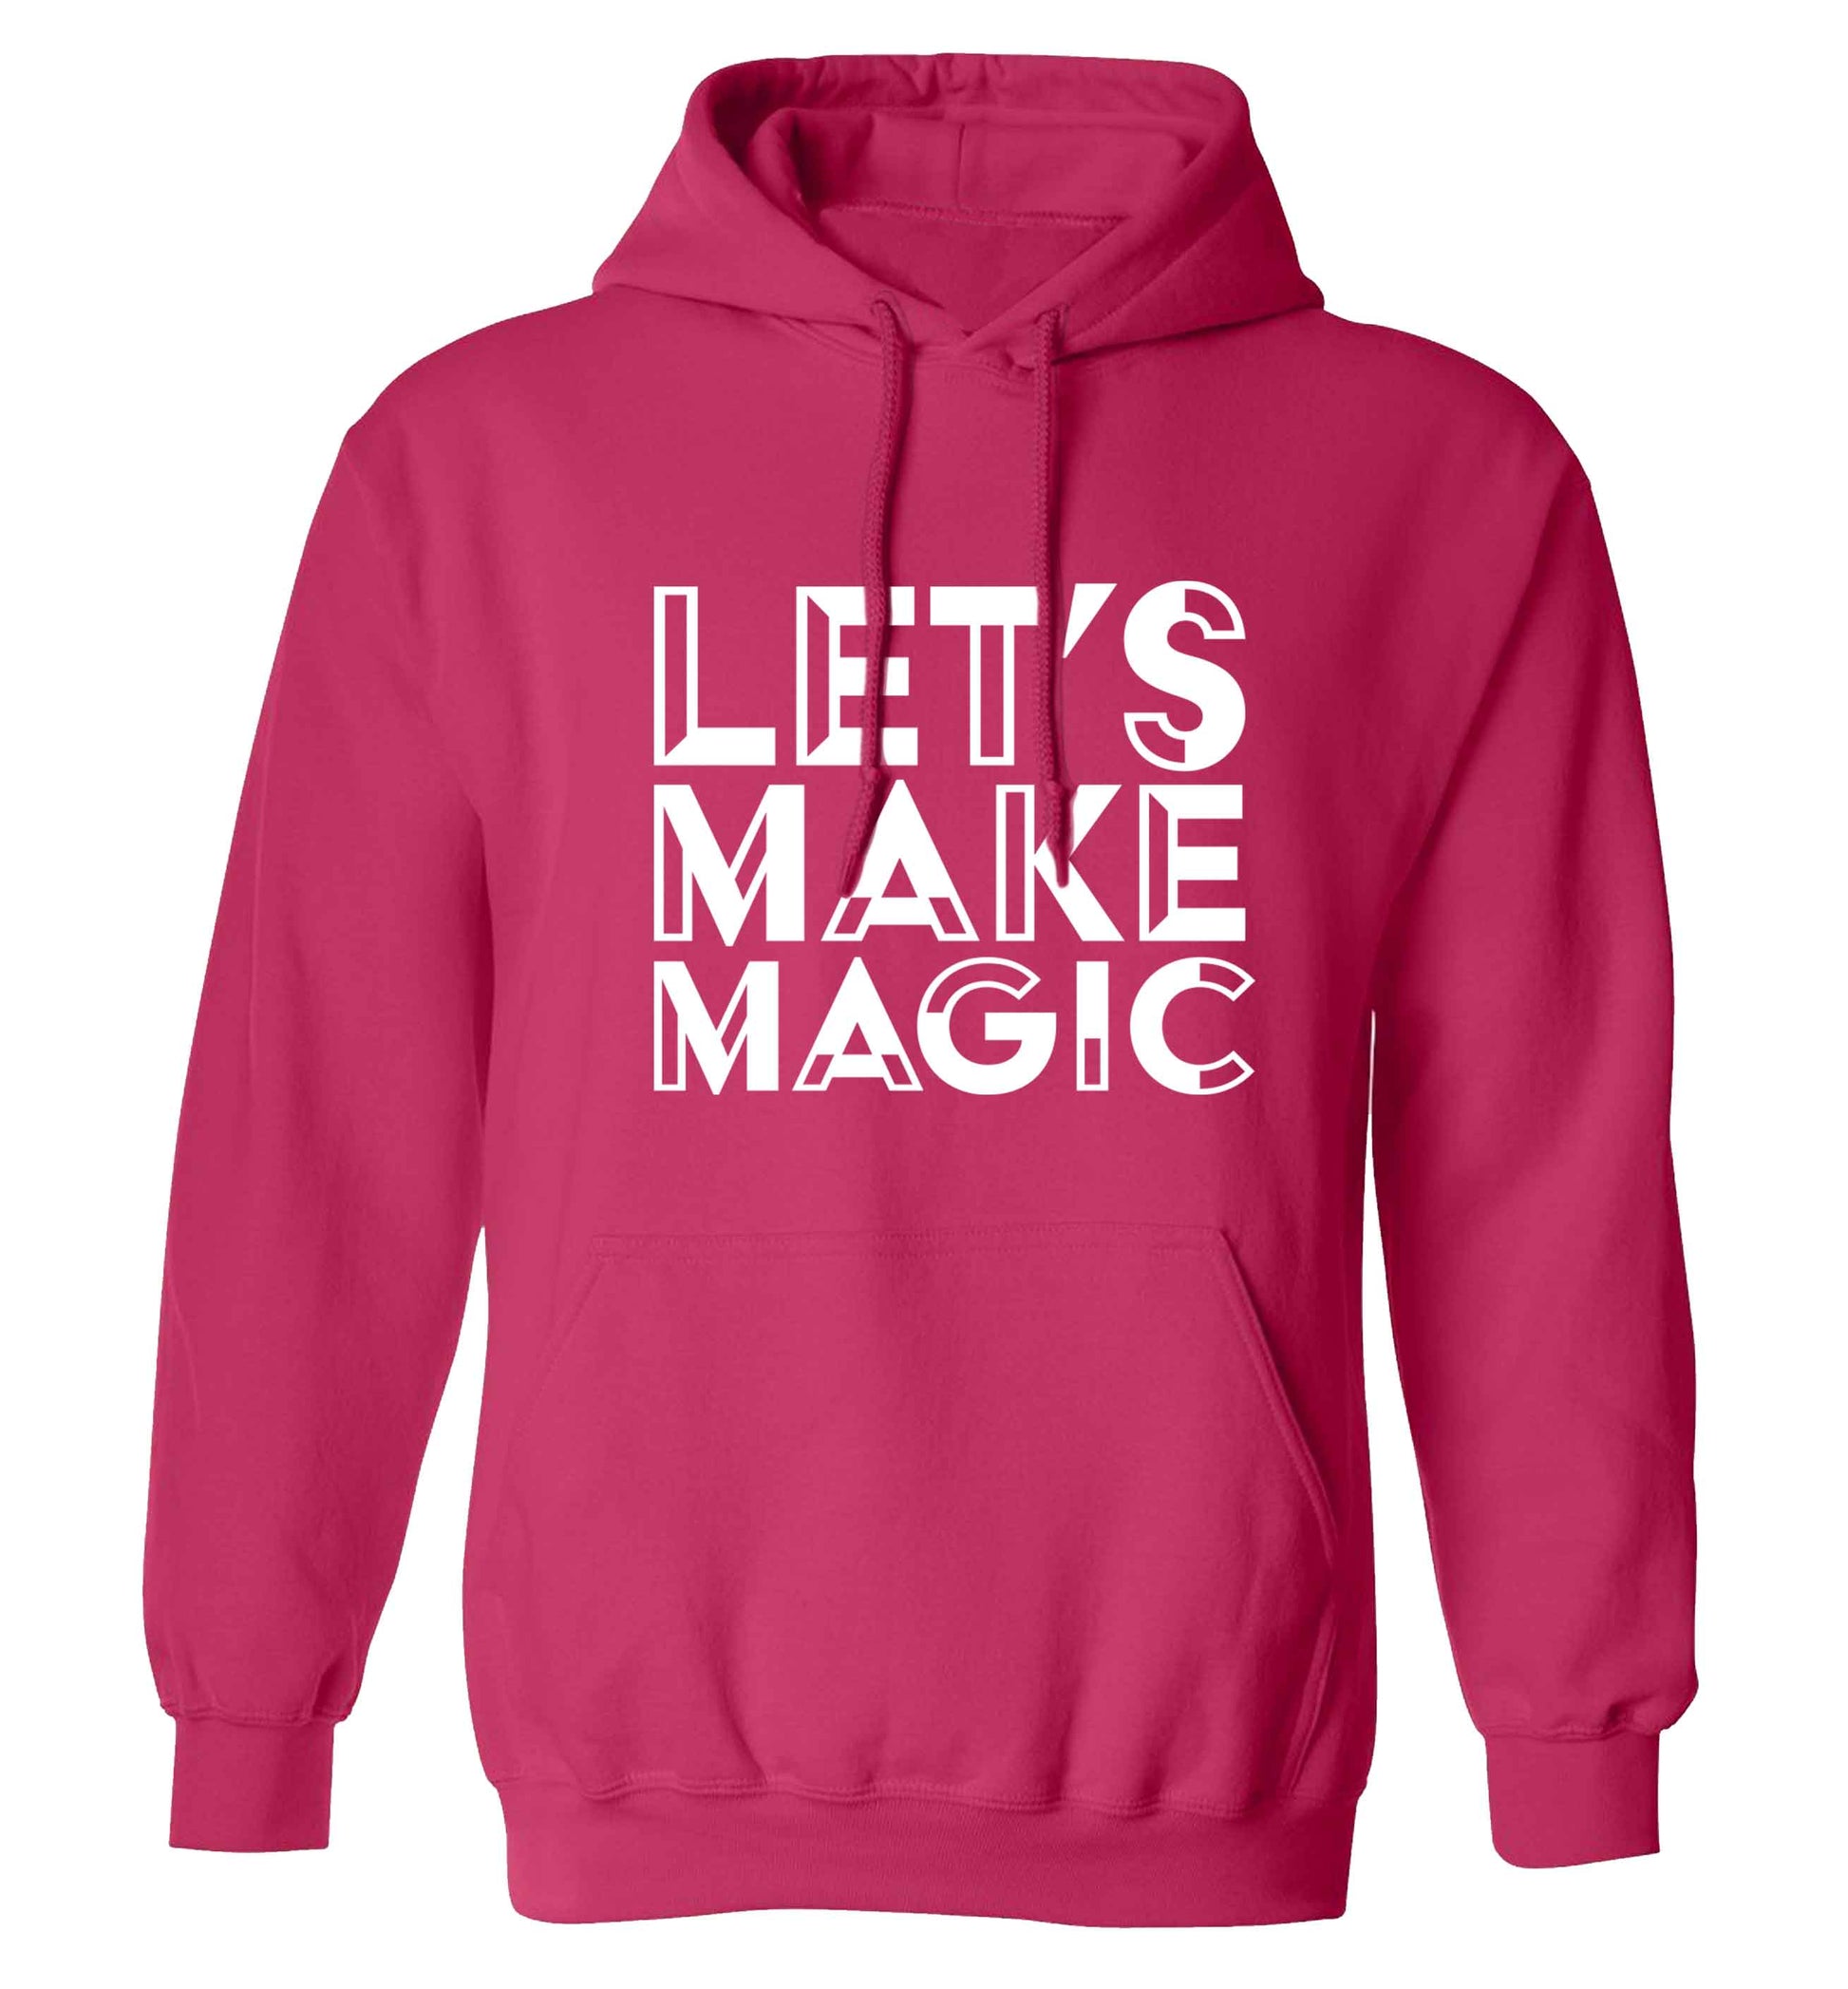 Let's make magic adults unisex pink hoodie 2XL